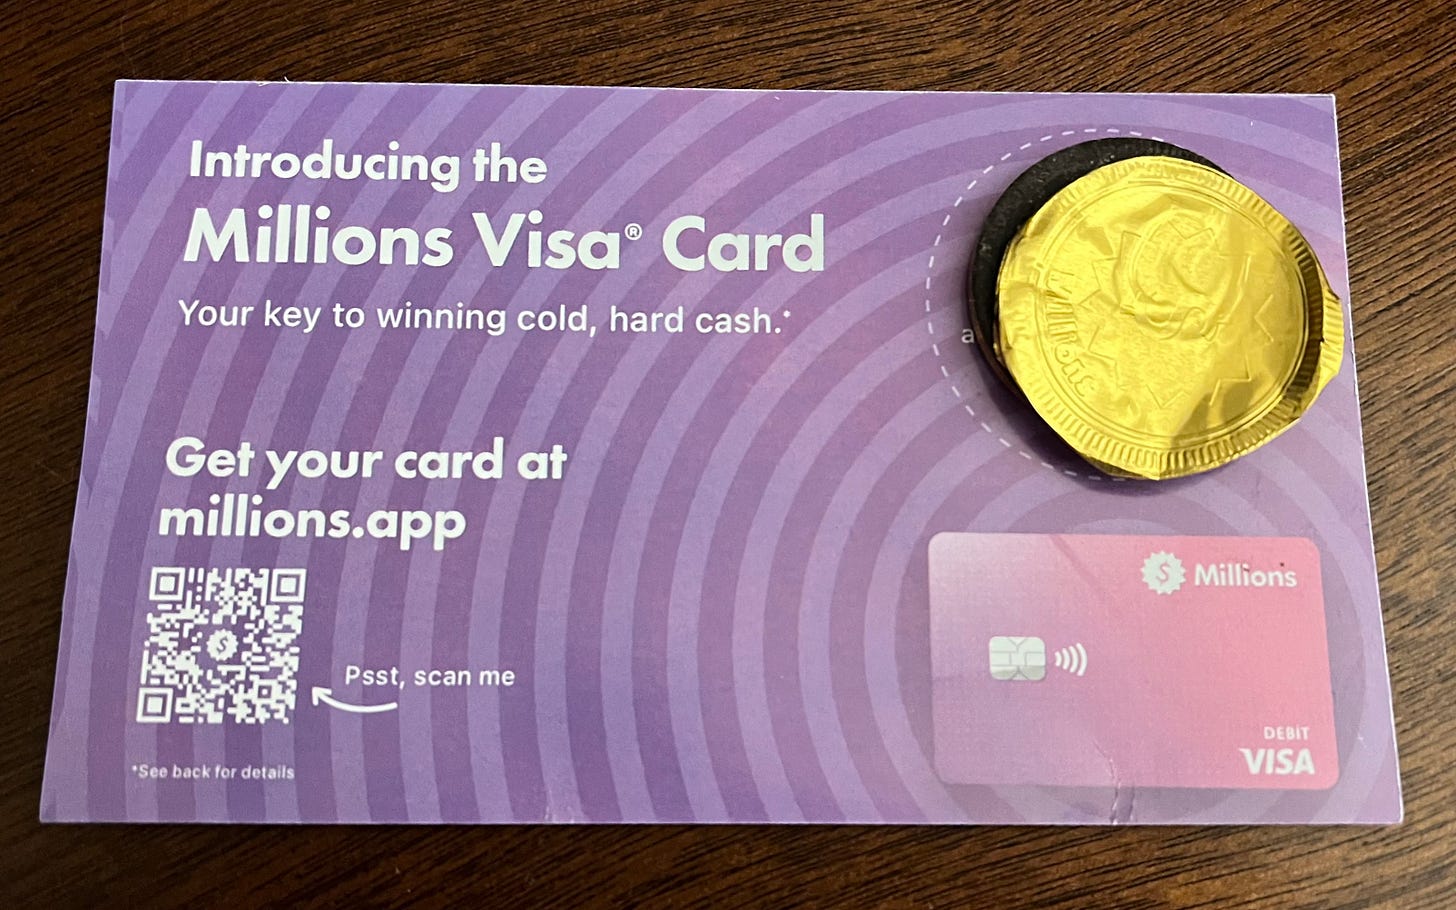 A chocolate coin attached to an advertisement for the Millions Visa Card.